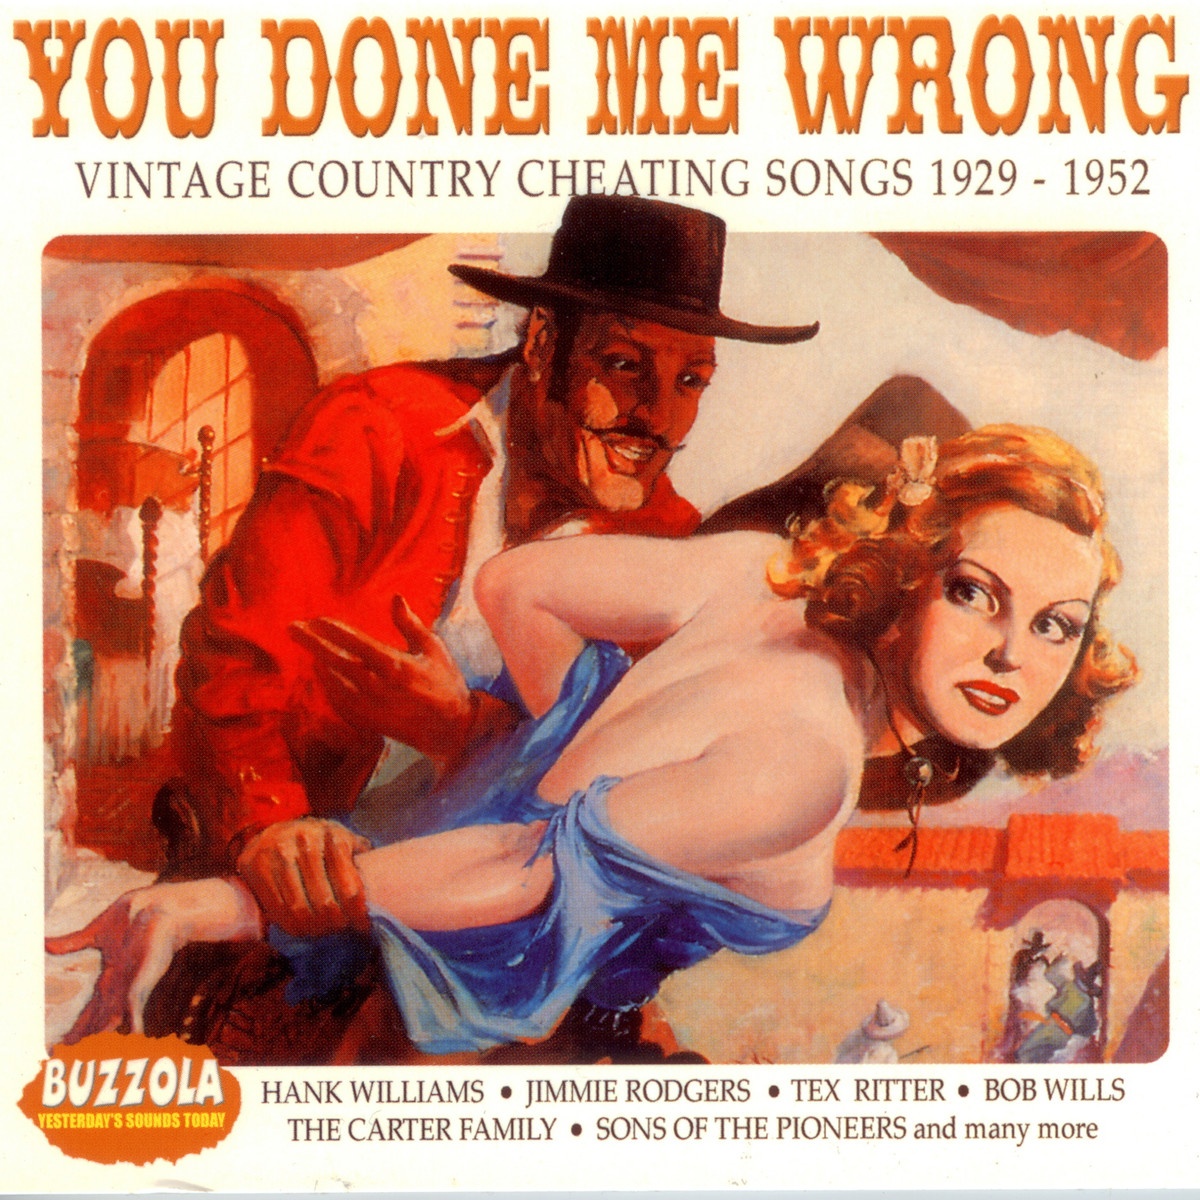 You Done Me Wrong: Vintage Country Cheating Songs 1929-1952